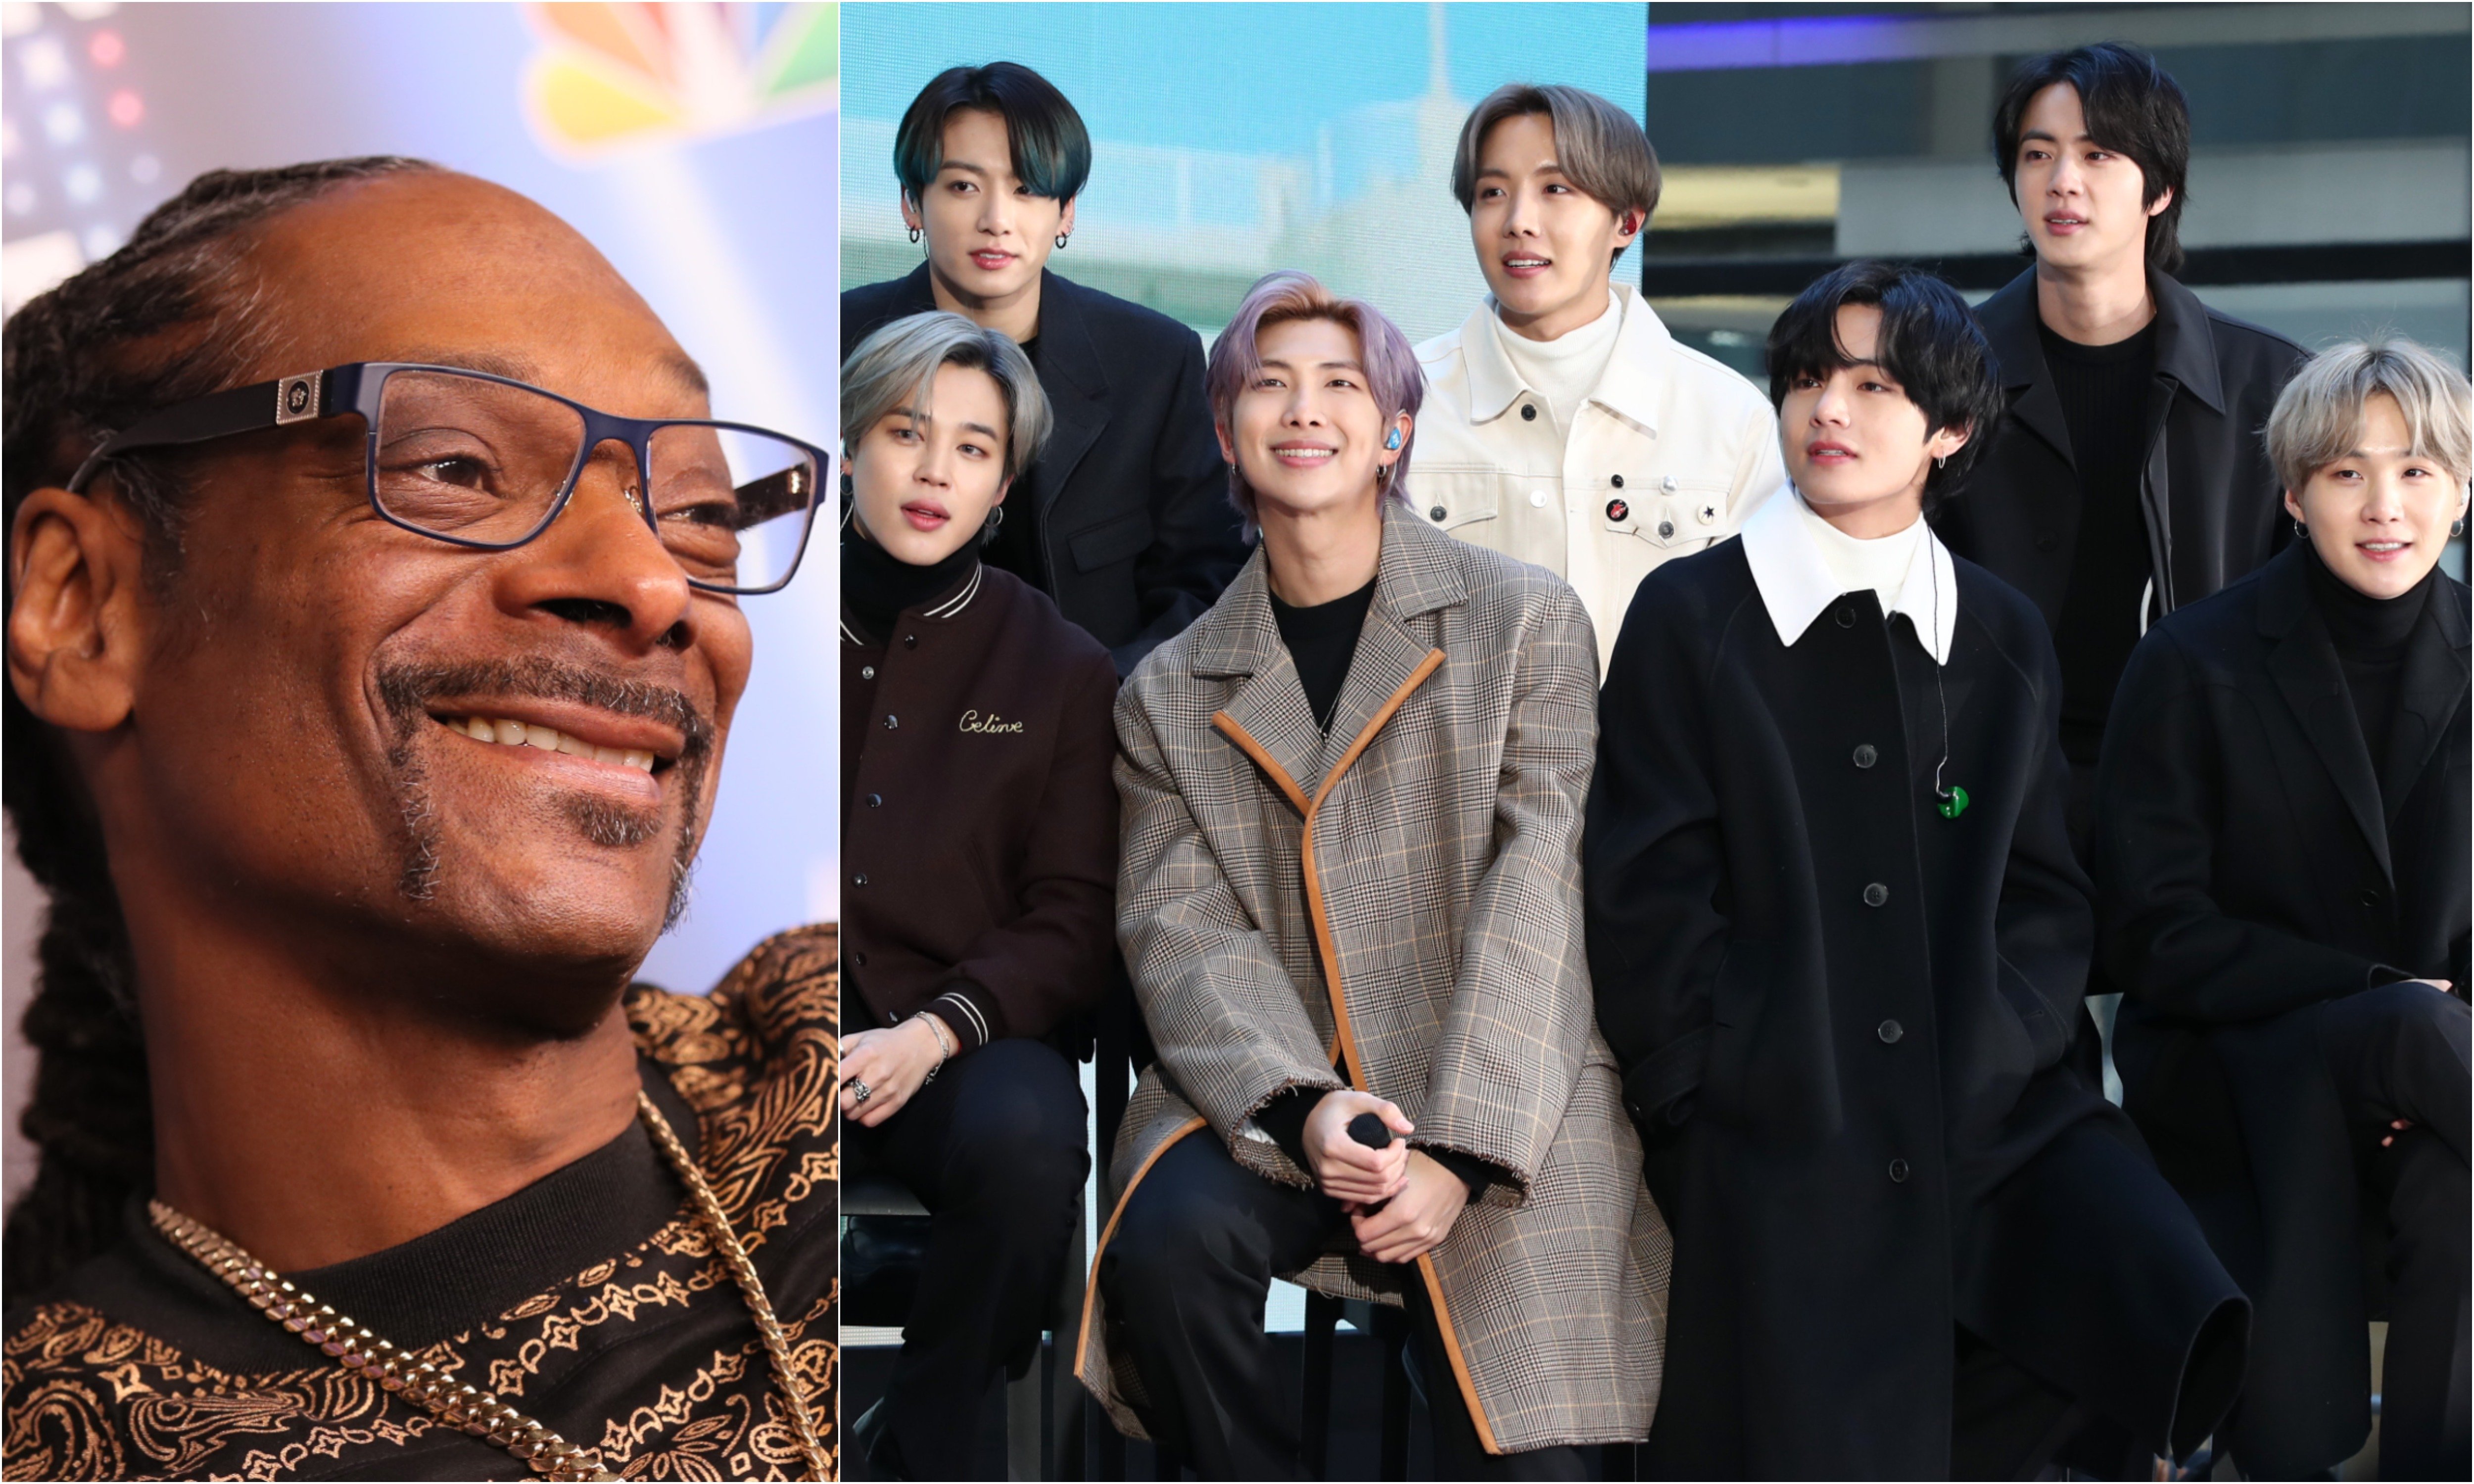 A joined photo of Snoop Dogg an the members of BTS